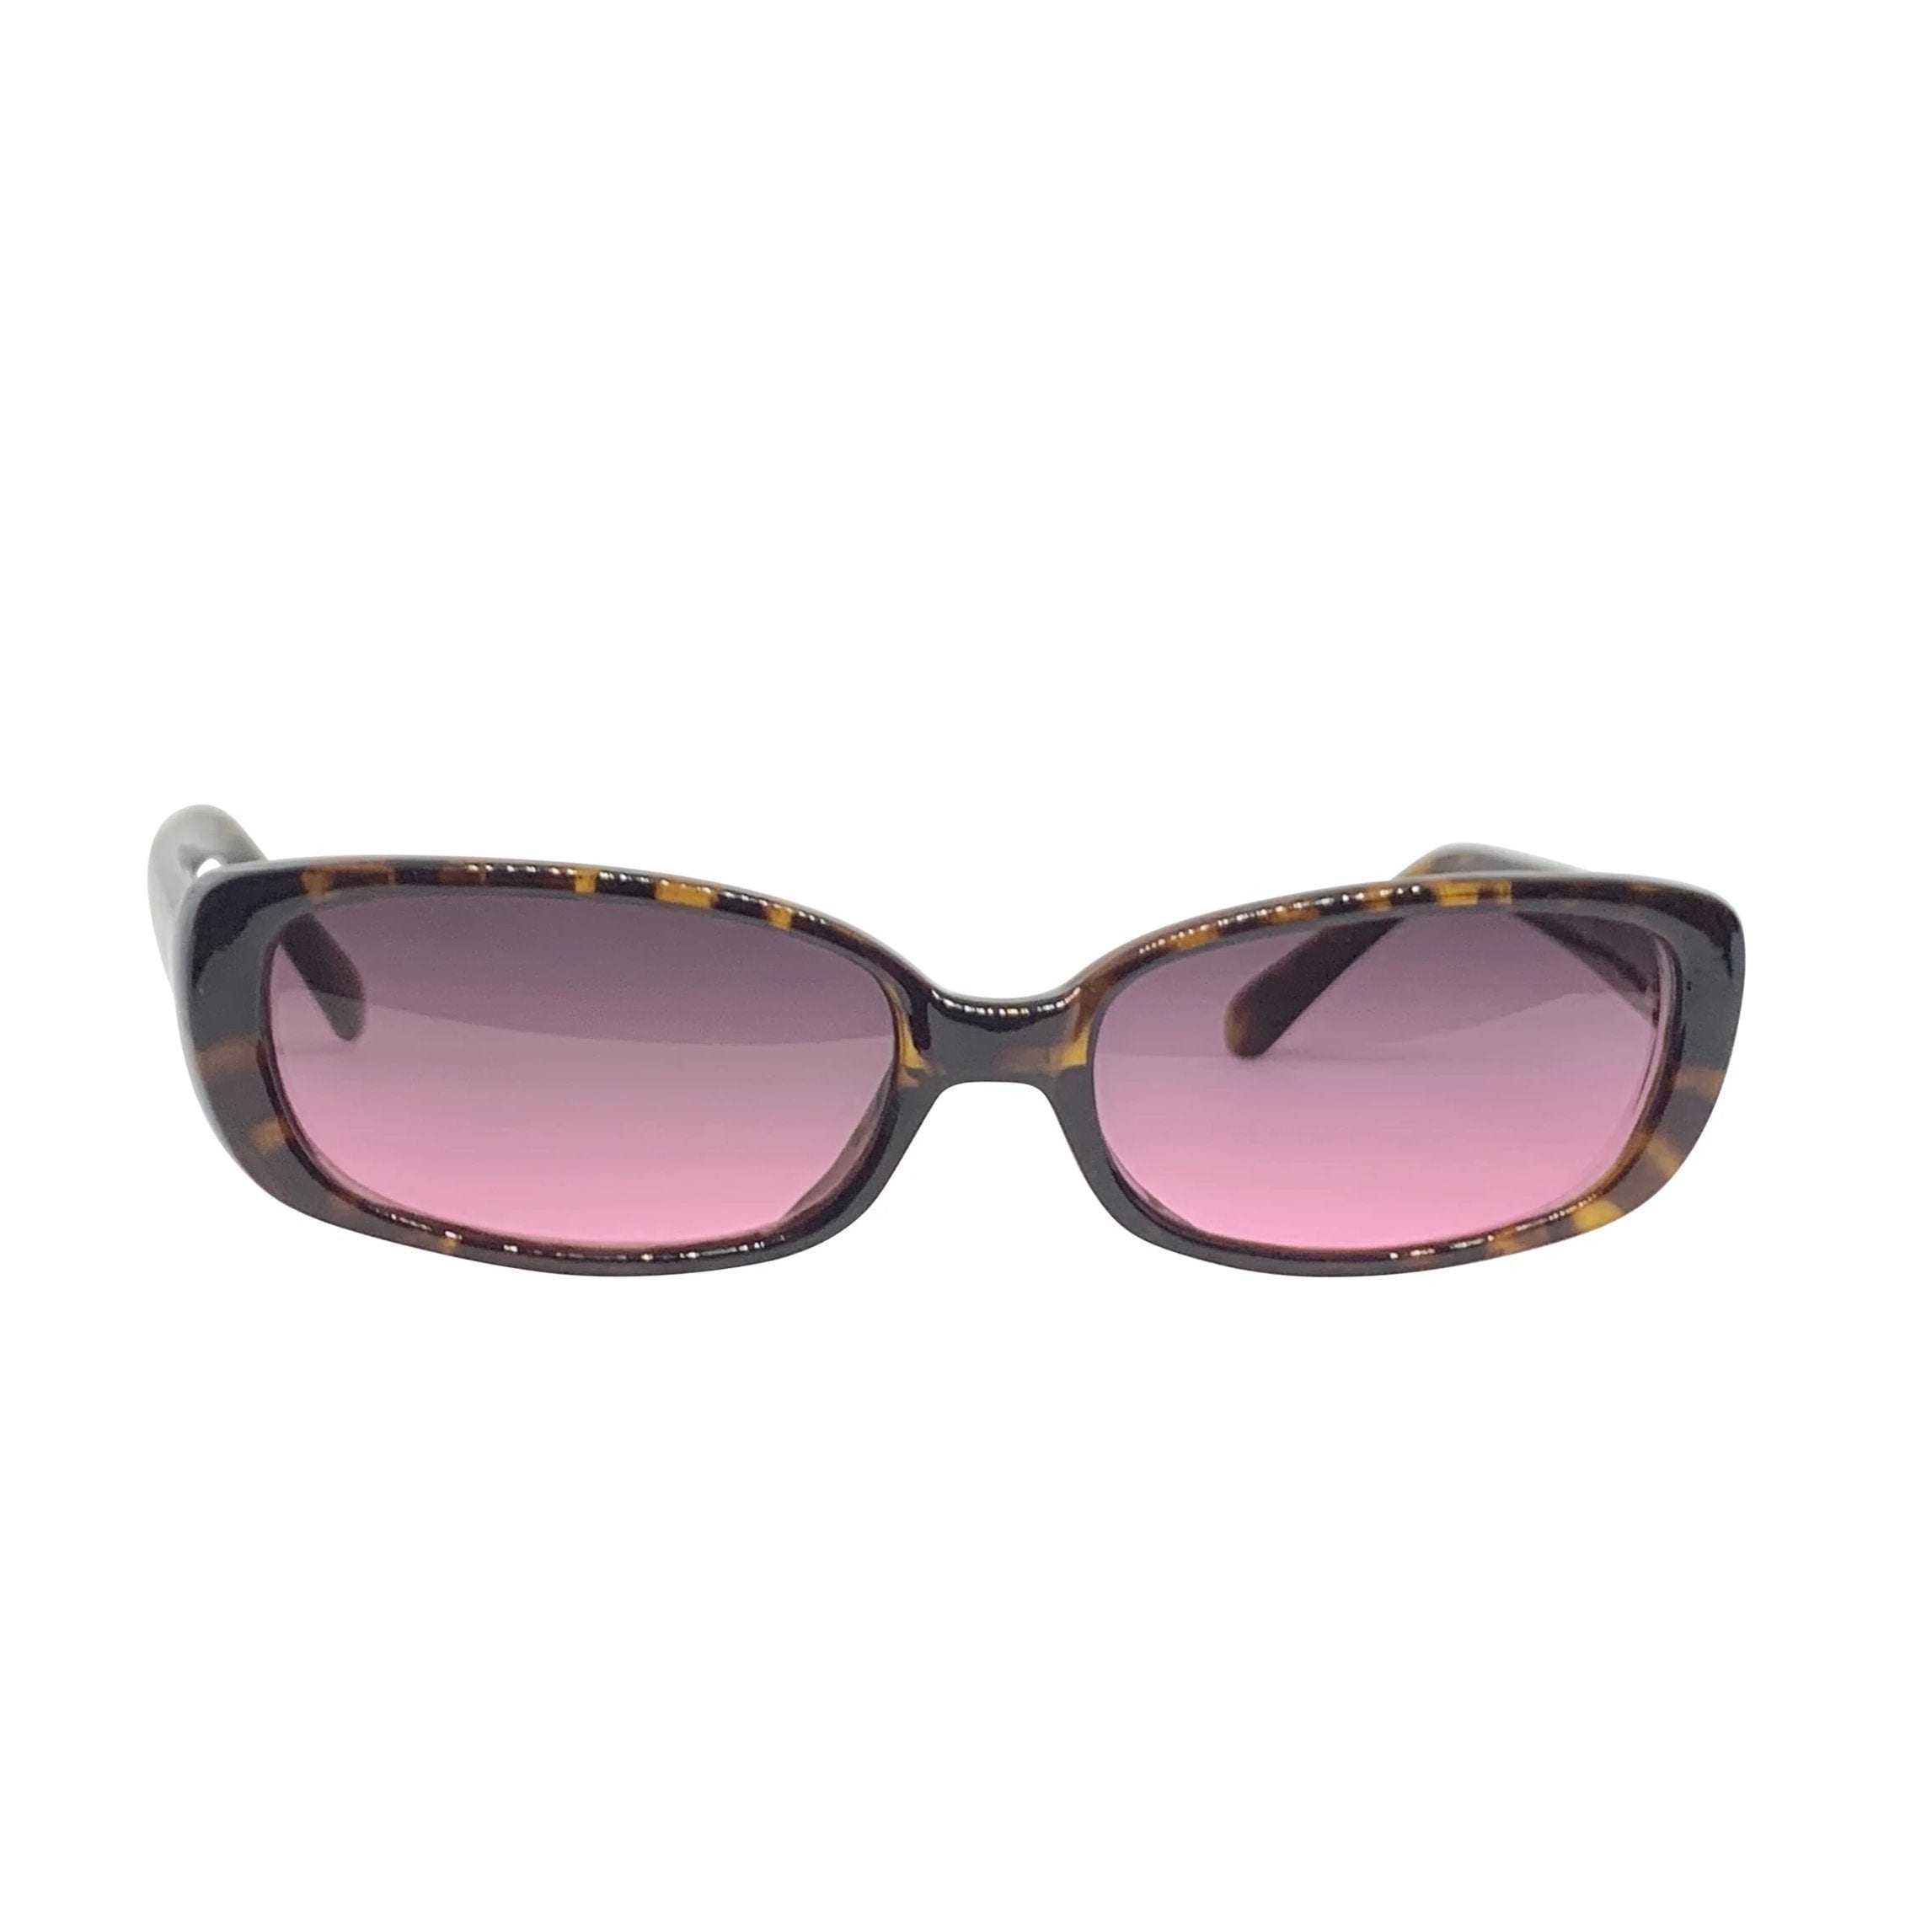 BUGGIN’ Tortoise and Pink 90s Square Sunnies